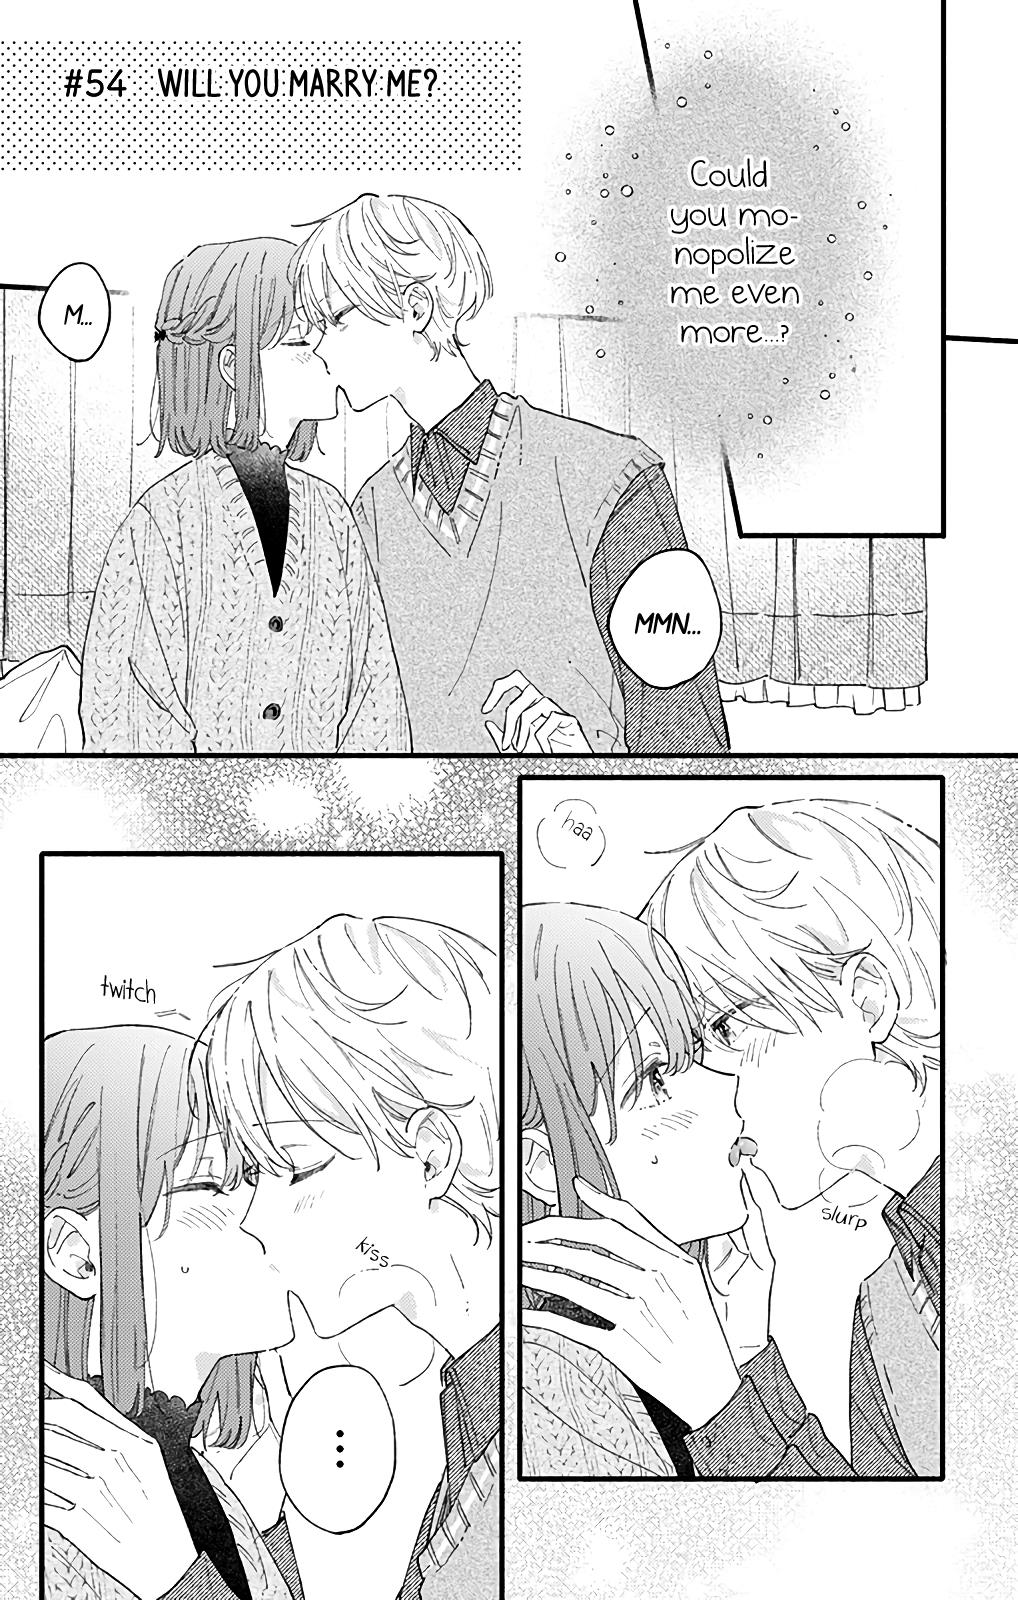 Sei-Chan, Your Love Is Too Much! Vol.15 Chapter 54: Will You Marry Me? - Picture 1